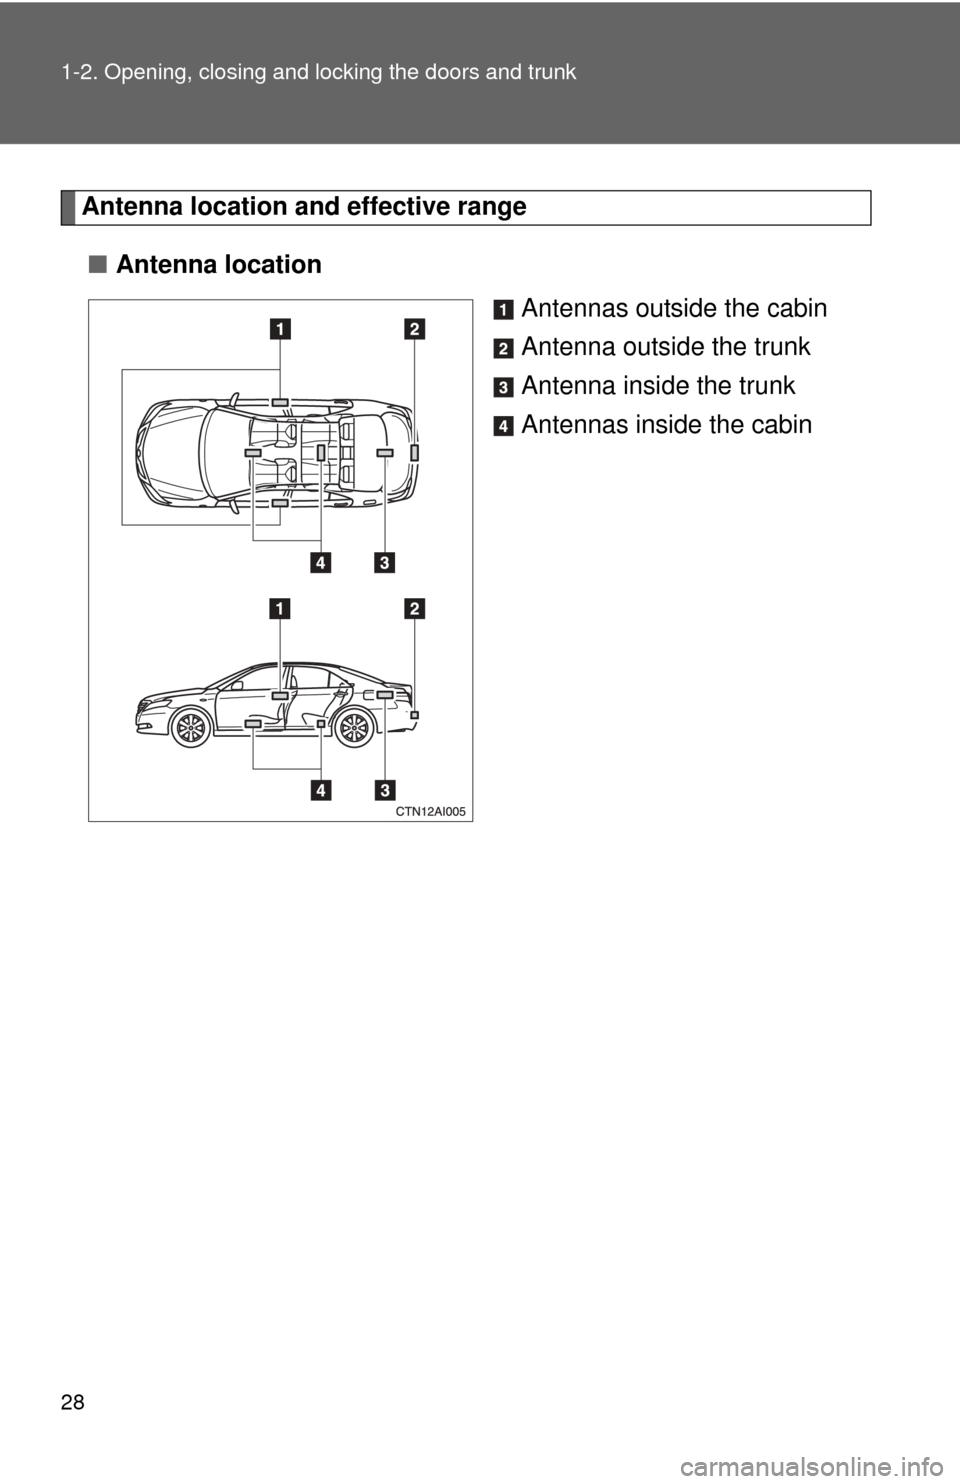 TOYOTA CAMRY 2008 XV40 / 8.G Owners Manual 28 1-2. Opening, closing and locking the doors and trunk
Antenna location and effective range
■ Antenna location
Antennas outside the cabin
Antenna outside the trunk
Antenna inside the trunk
Antenna